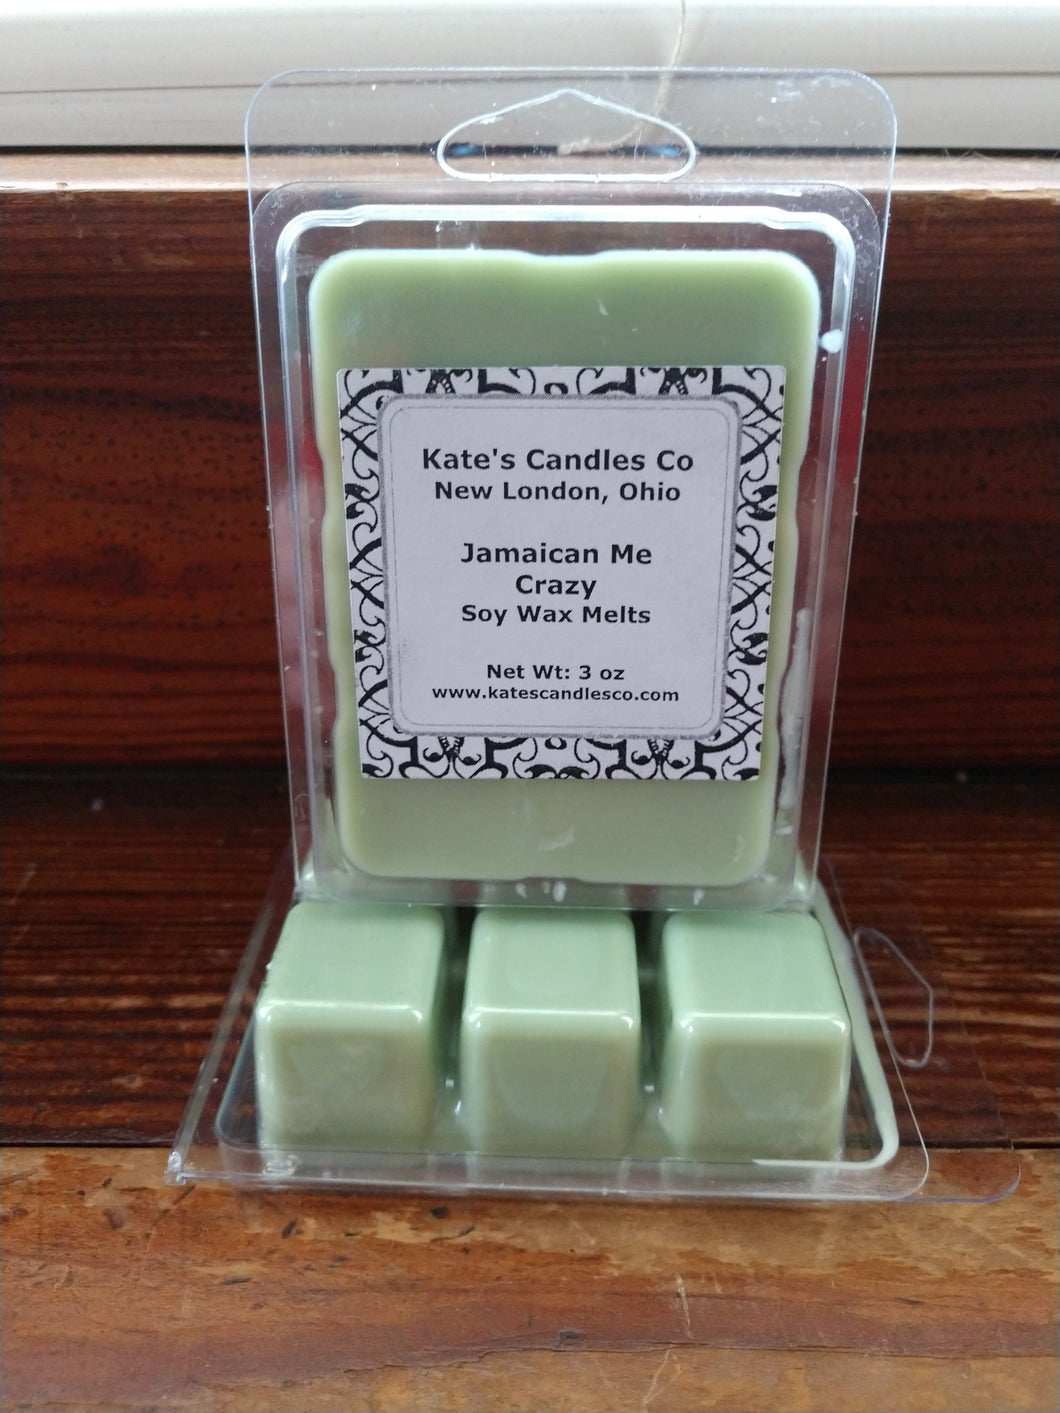 Jamaica Me Crazy Soy Wax Melts - Kate's Candles Co.